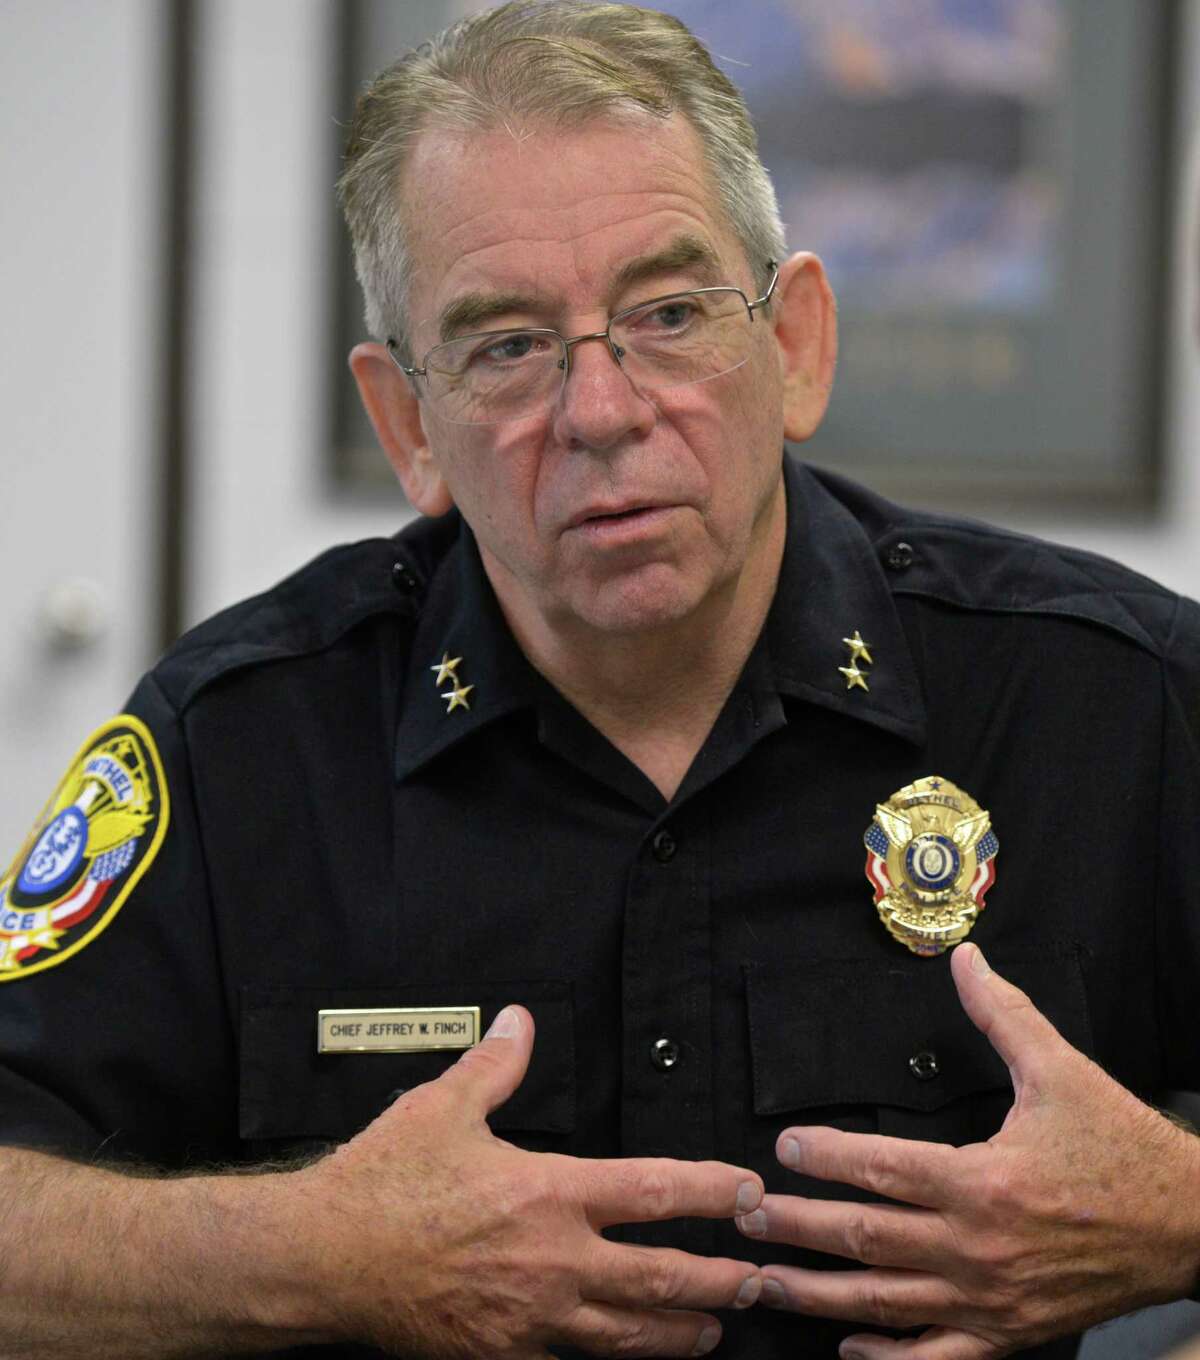 Bethel Police Chief Jeffrey Finch talks about the FBI's latest crime report on Thursday, October 1, 2015, in Bethel, Conn.